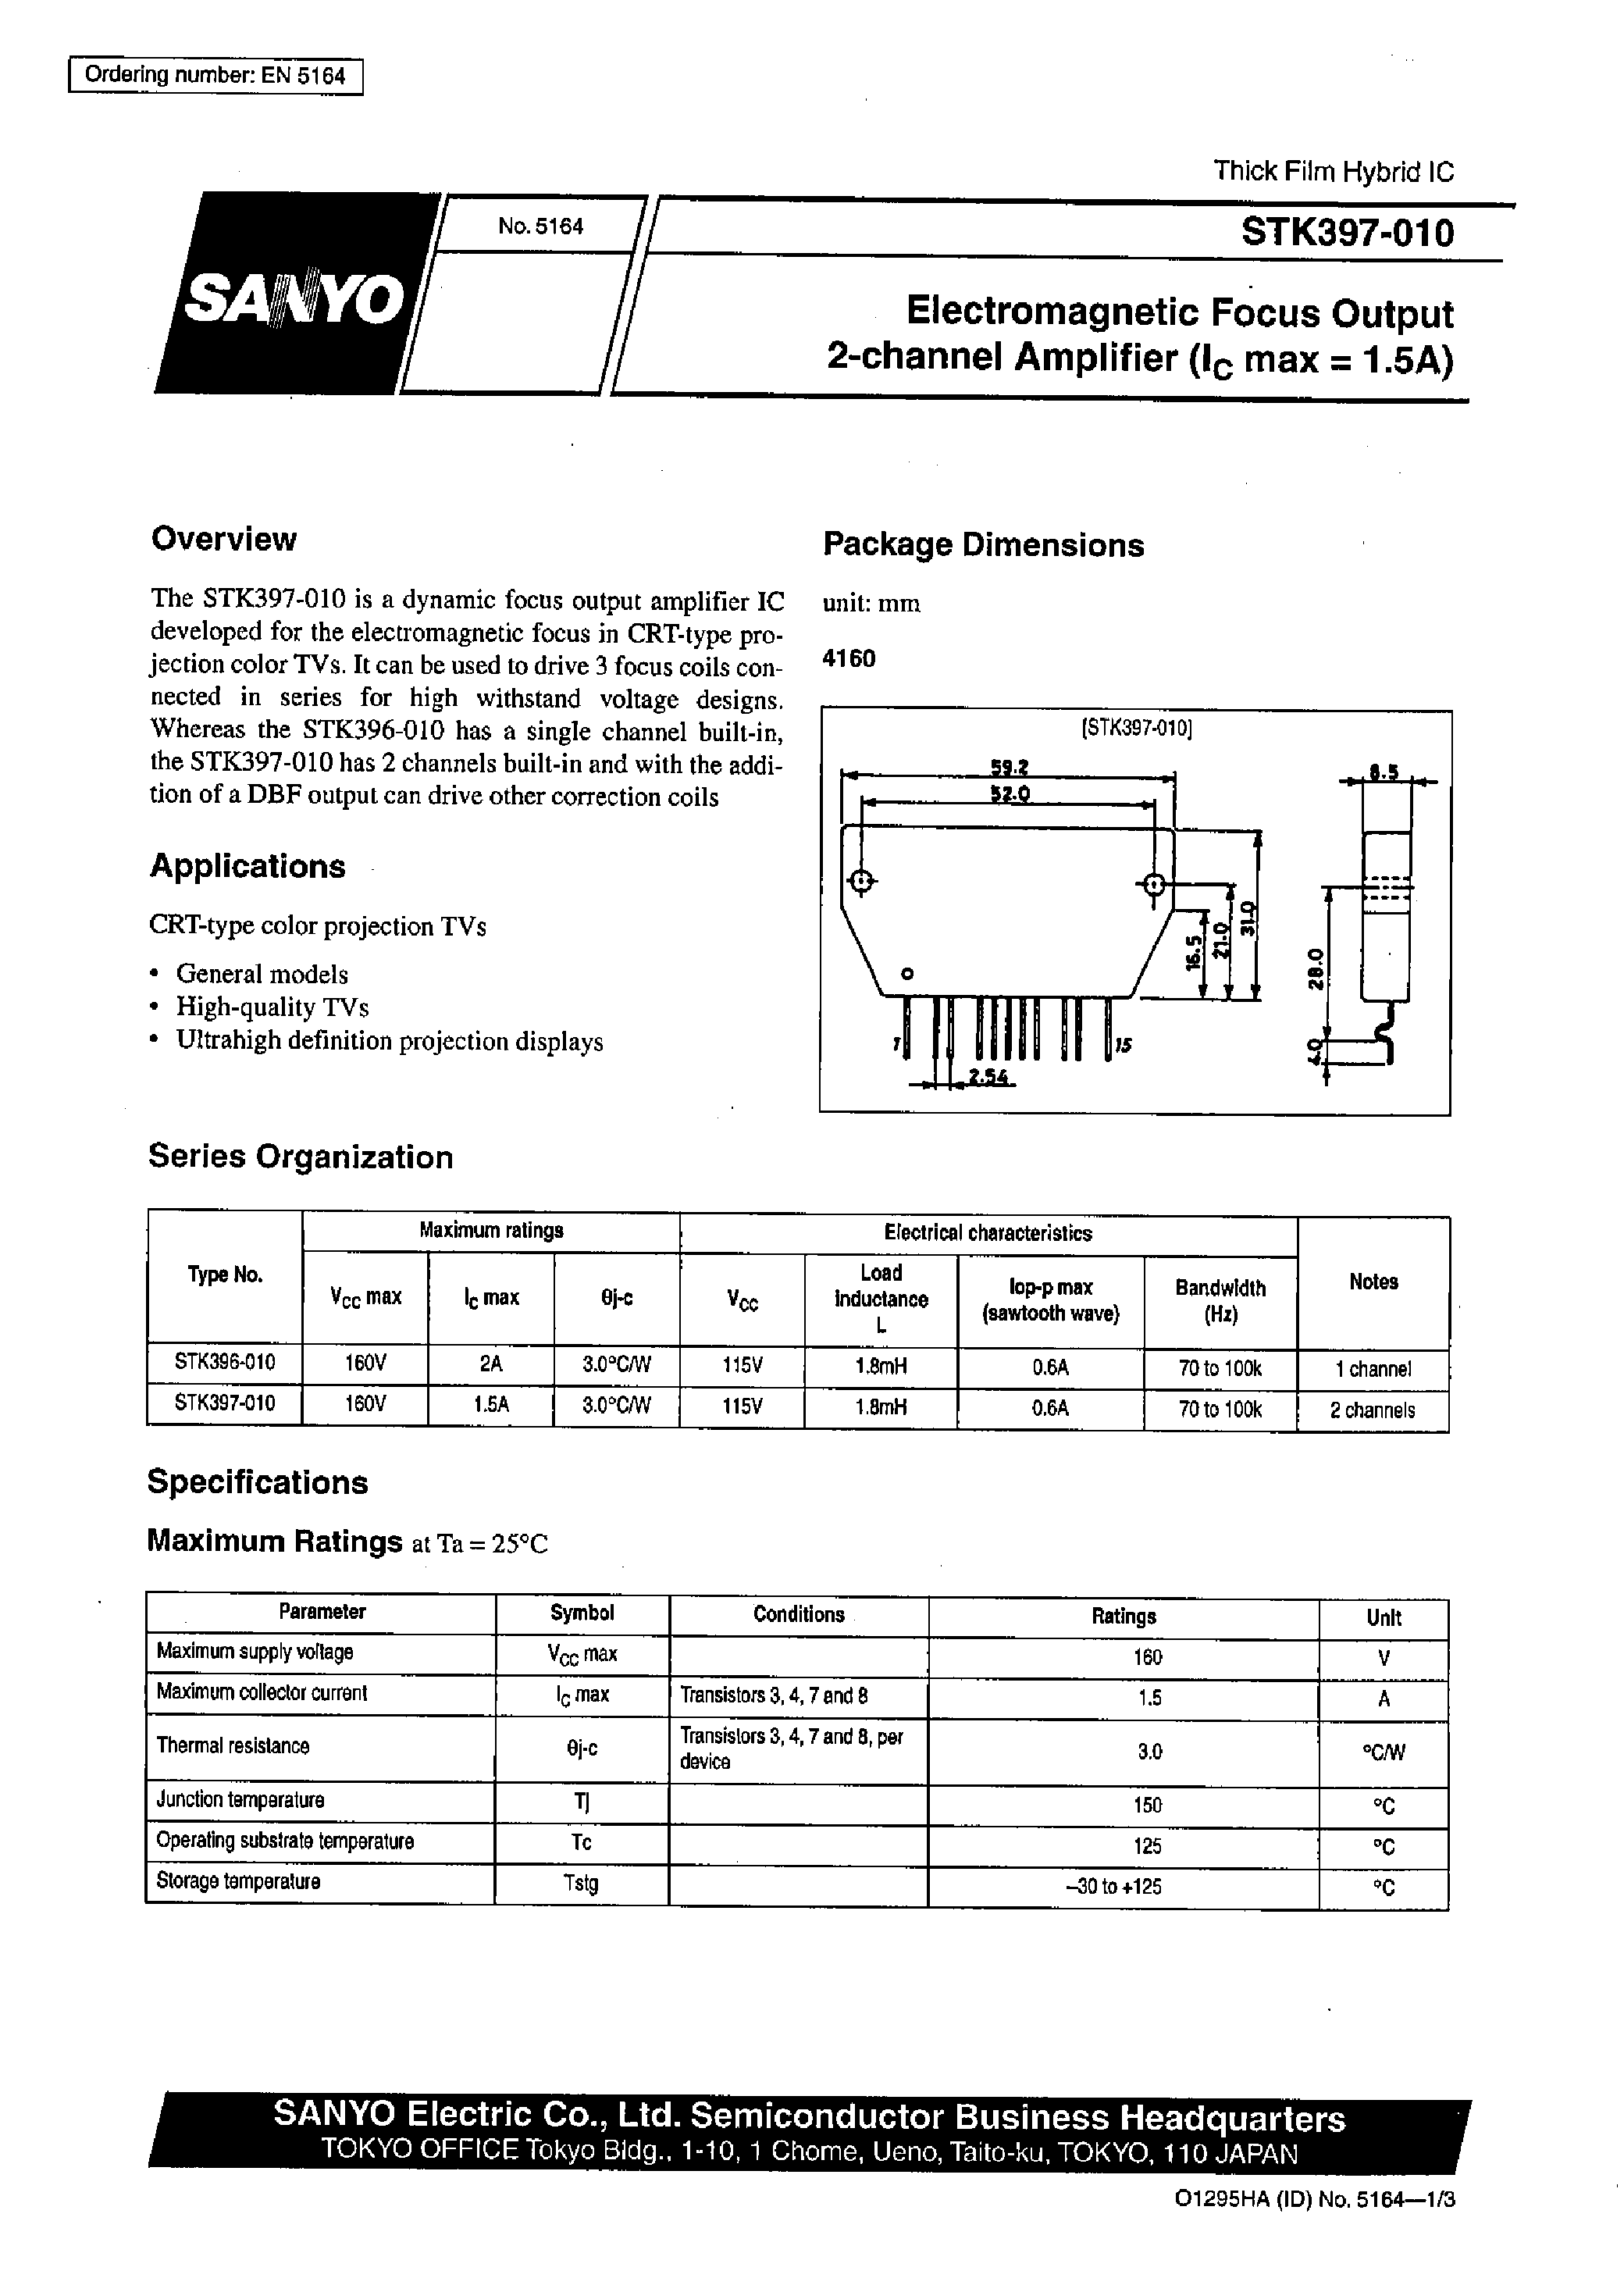 Datasheet STK397-010 - Electromagnetic Focus Output 2-Channel Amplifier(Ic max=1.5A) page 1